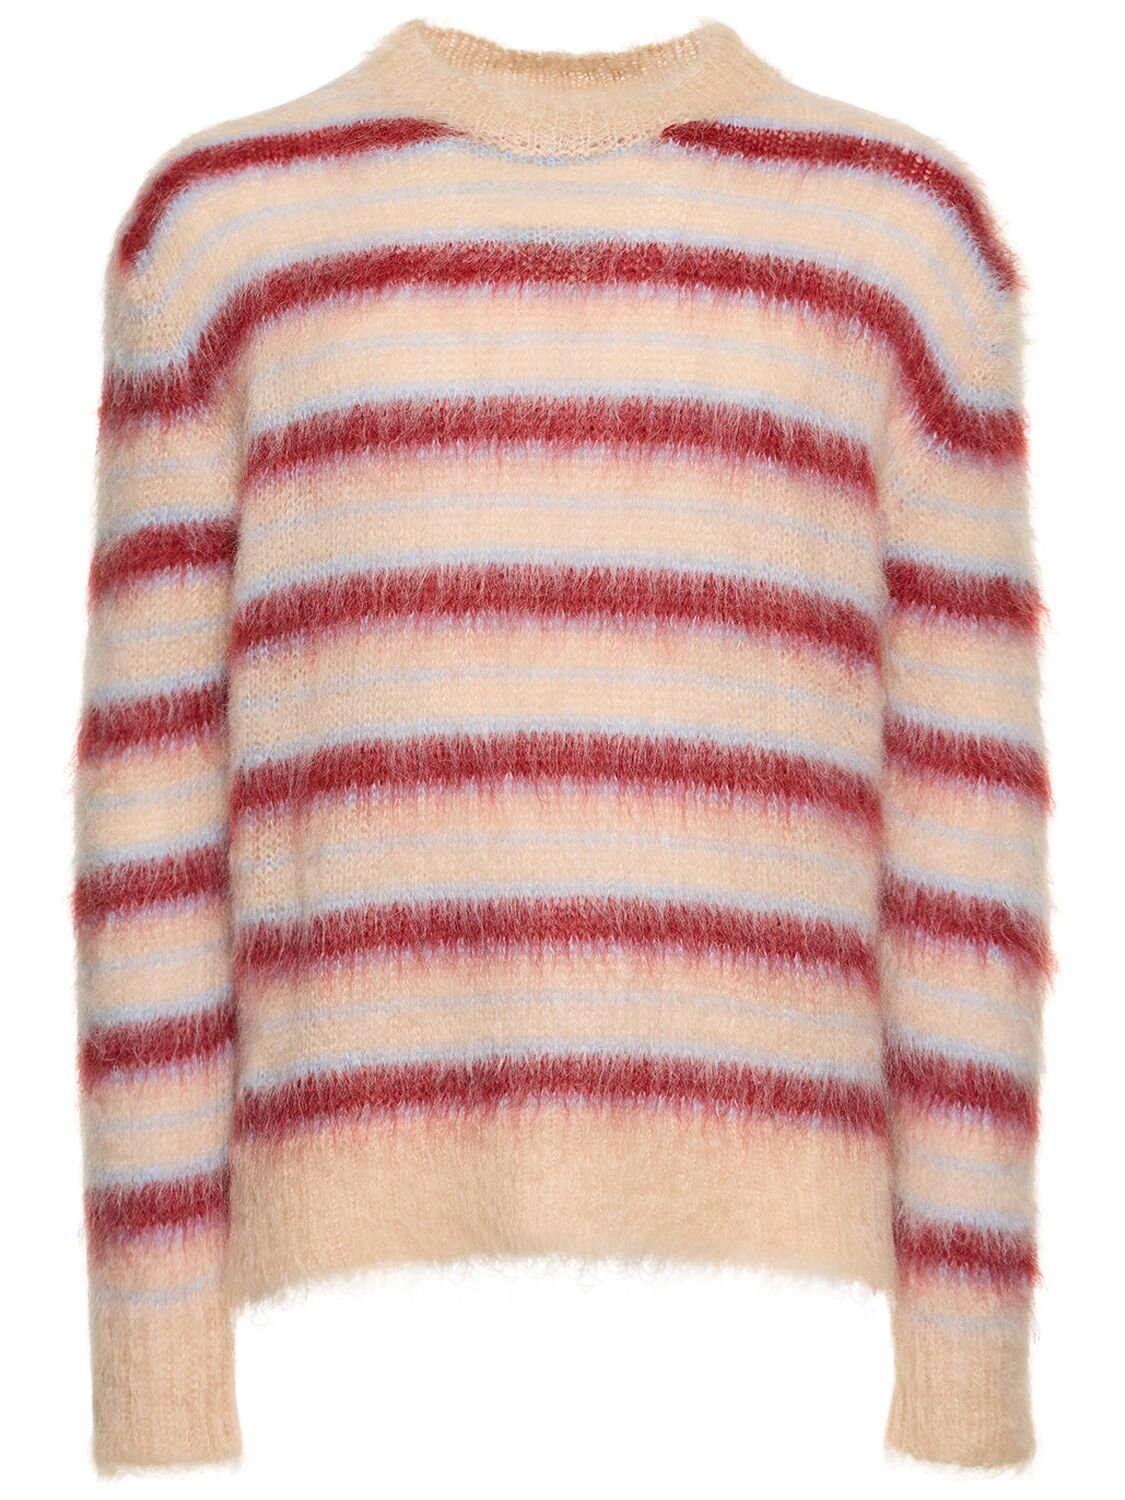 MARNI STRIPED MOHAIR BLEND KNIT SWEATER